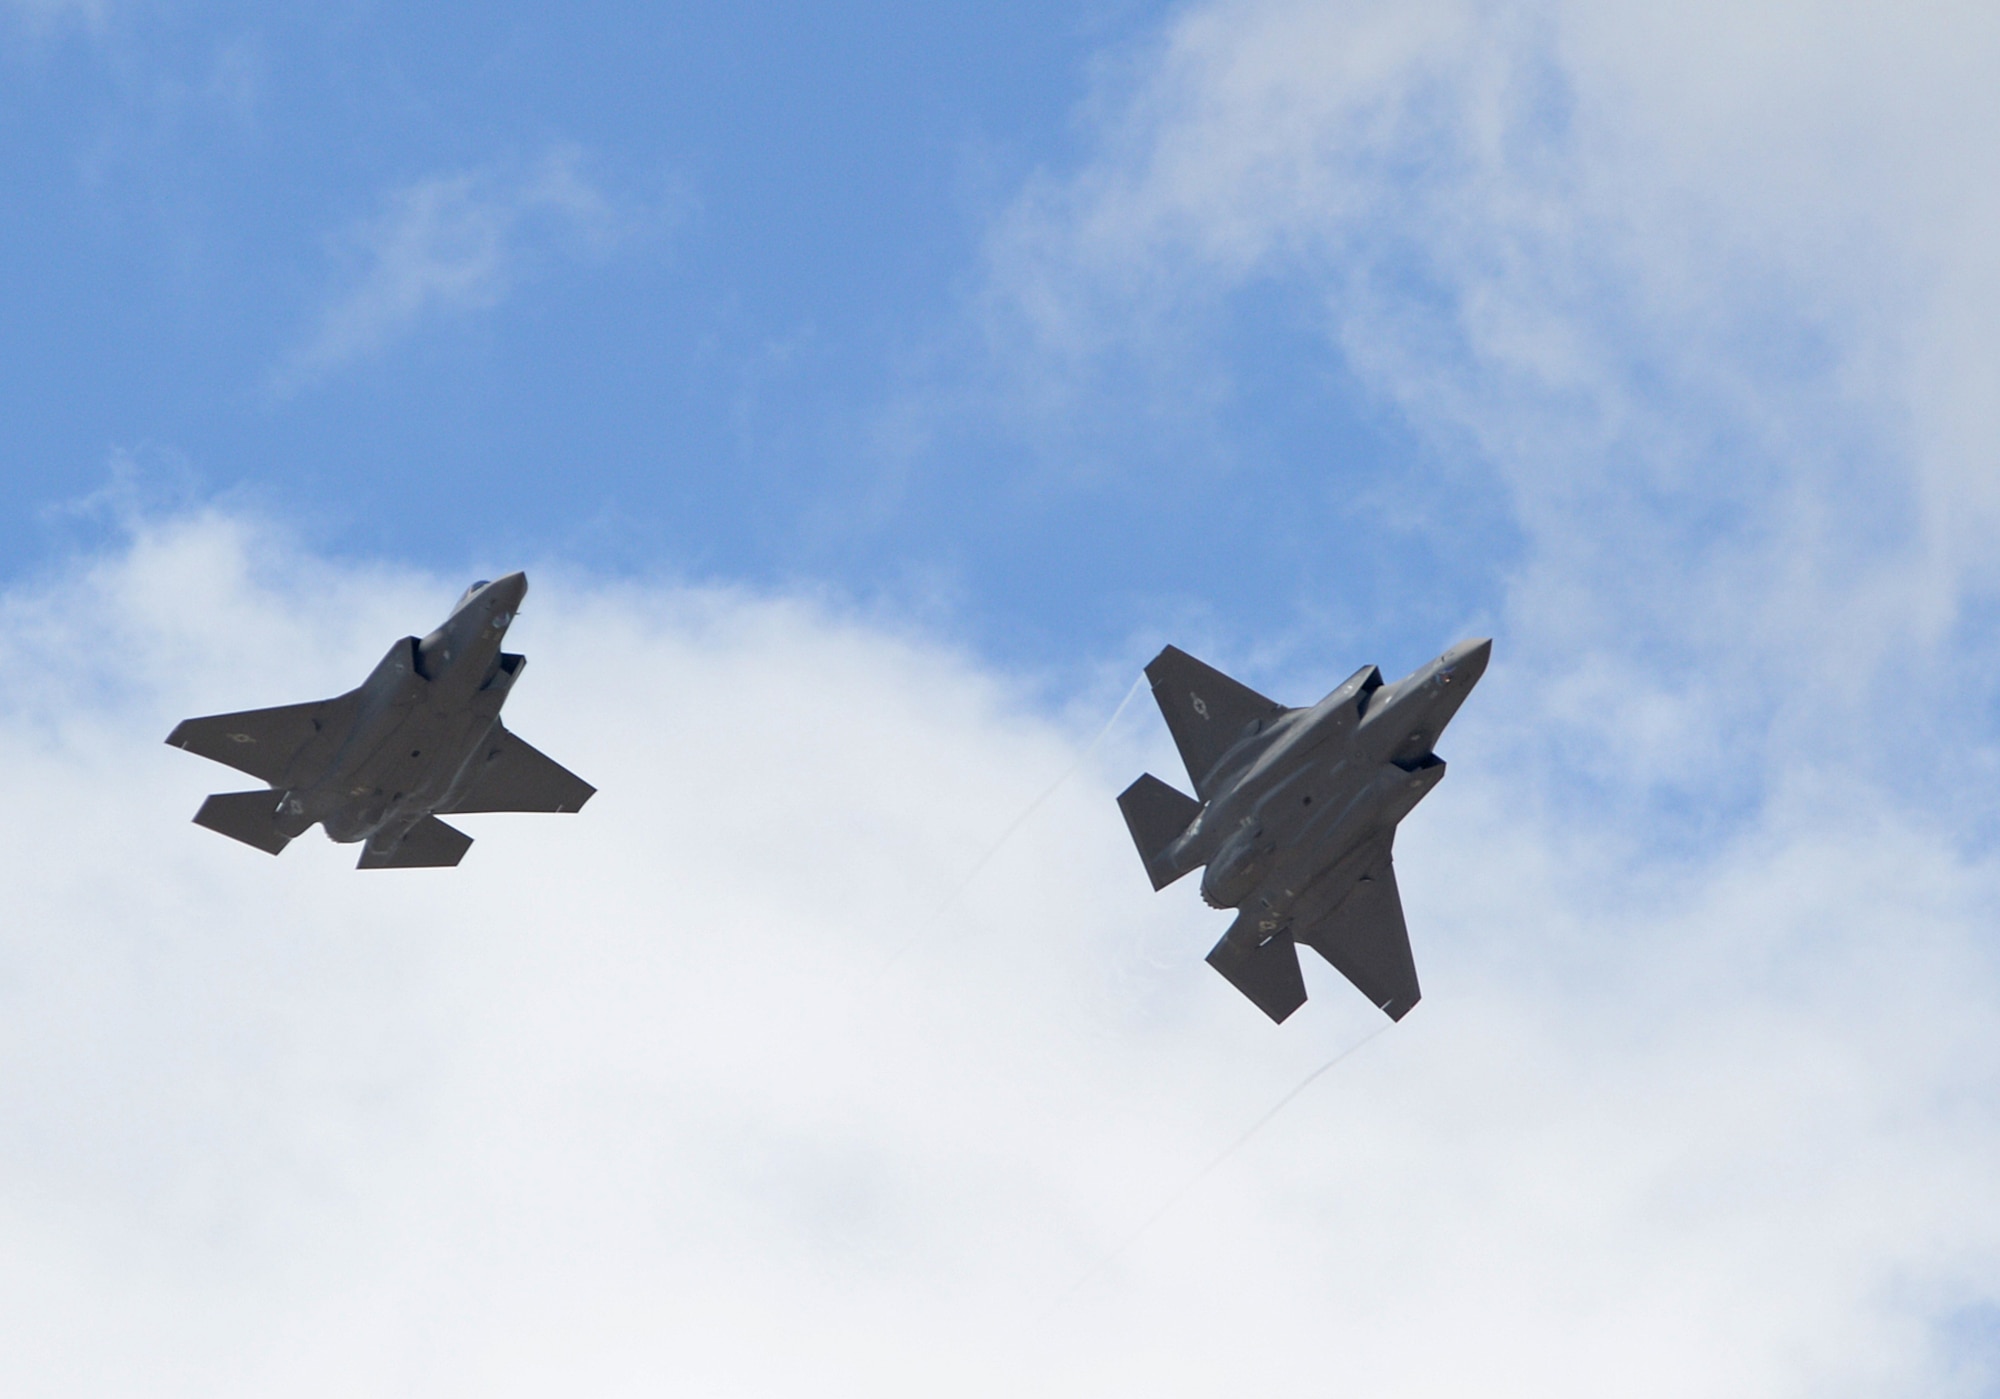 The first two operational F-35A Lightning II aircraft arrive at Hill Air Force Base, Utah, Sept. 2, 2015. The jets were piloted by Col. David Lyons, 388th Fighter Wing commander, and Lt. Col. Yosef Morris, 34th Fighter squadron director of operations. Hill will receive up to 70 additional combat-coded F-35s on a staggered basis through 2019. The jets will be flown and maintained by Hill Airmen assigned to the active-duty 388th Fighter Wing and Reserve 419th Fighter Wing(U.S. Air Force photo/Alex R. Lloyd)